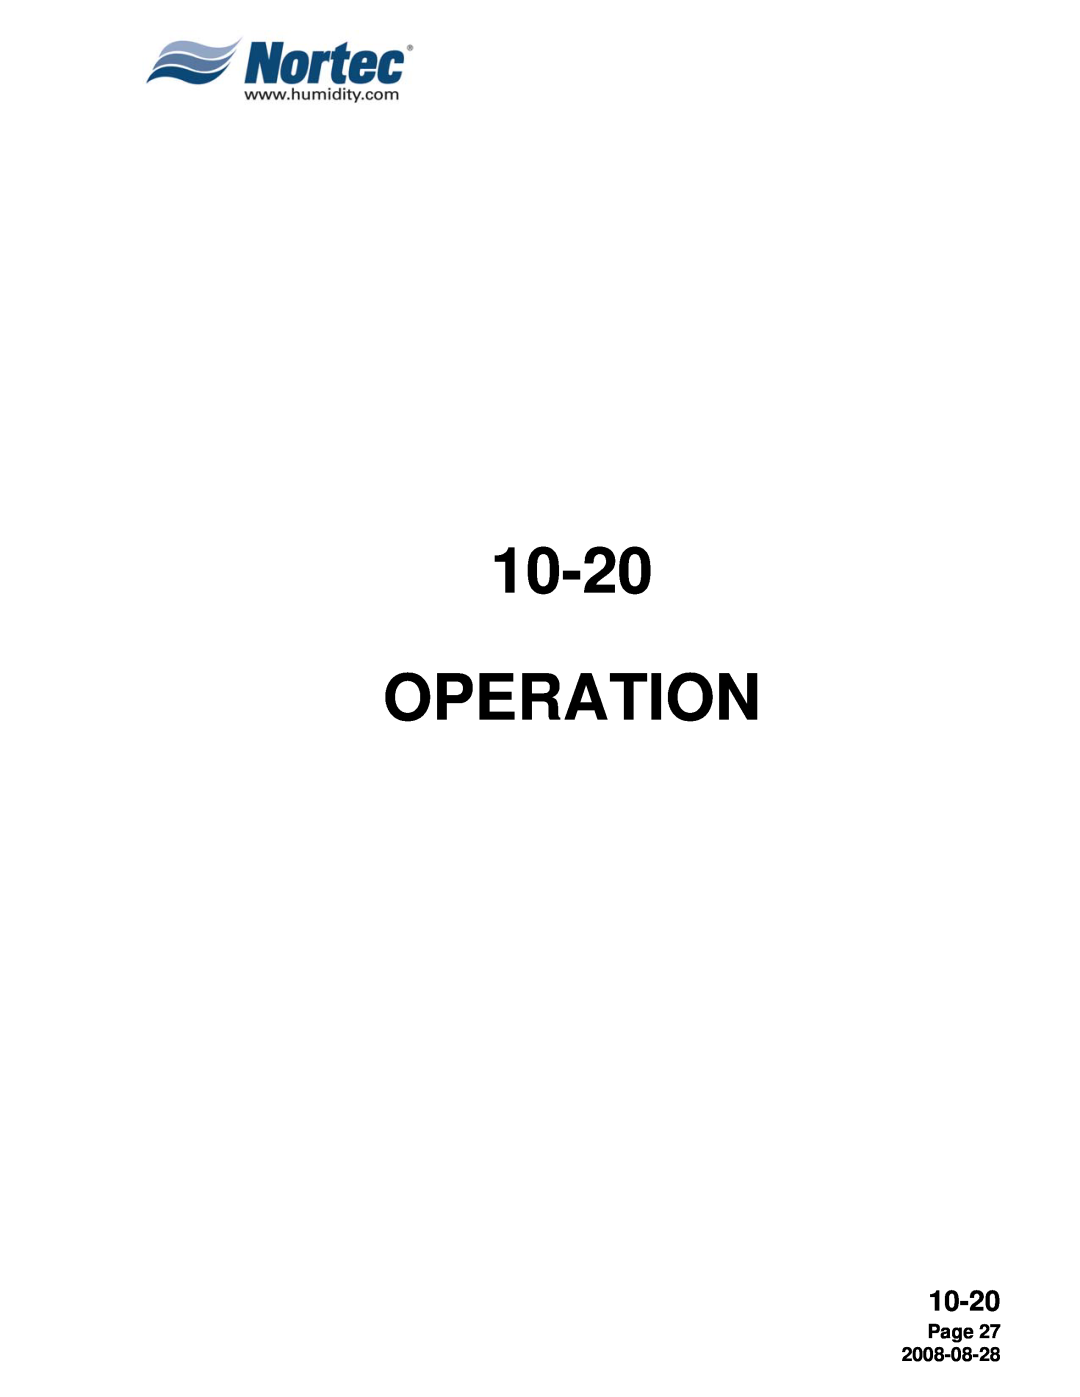 Nortec NH Series installation manual Operation, 10-20, Page 27 